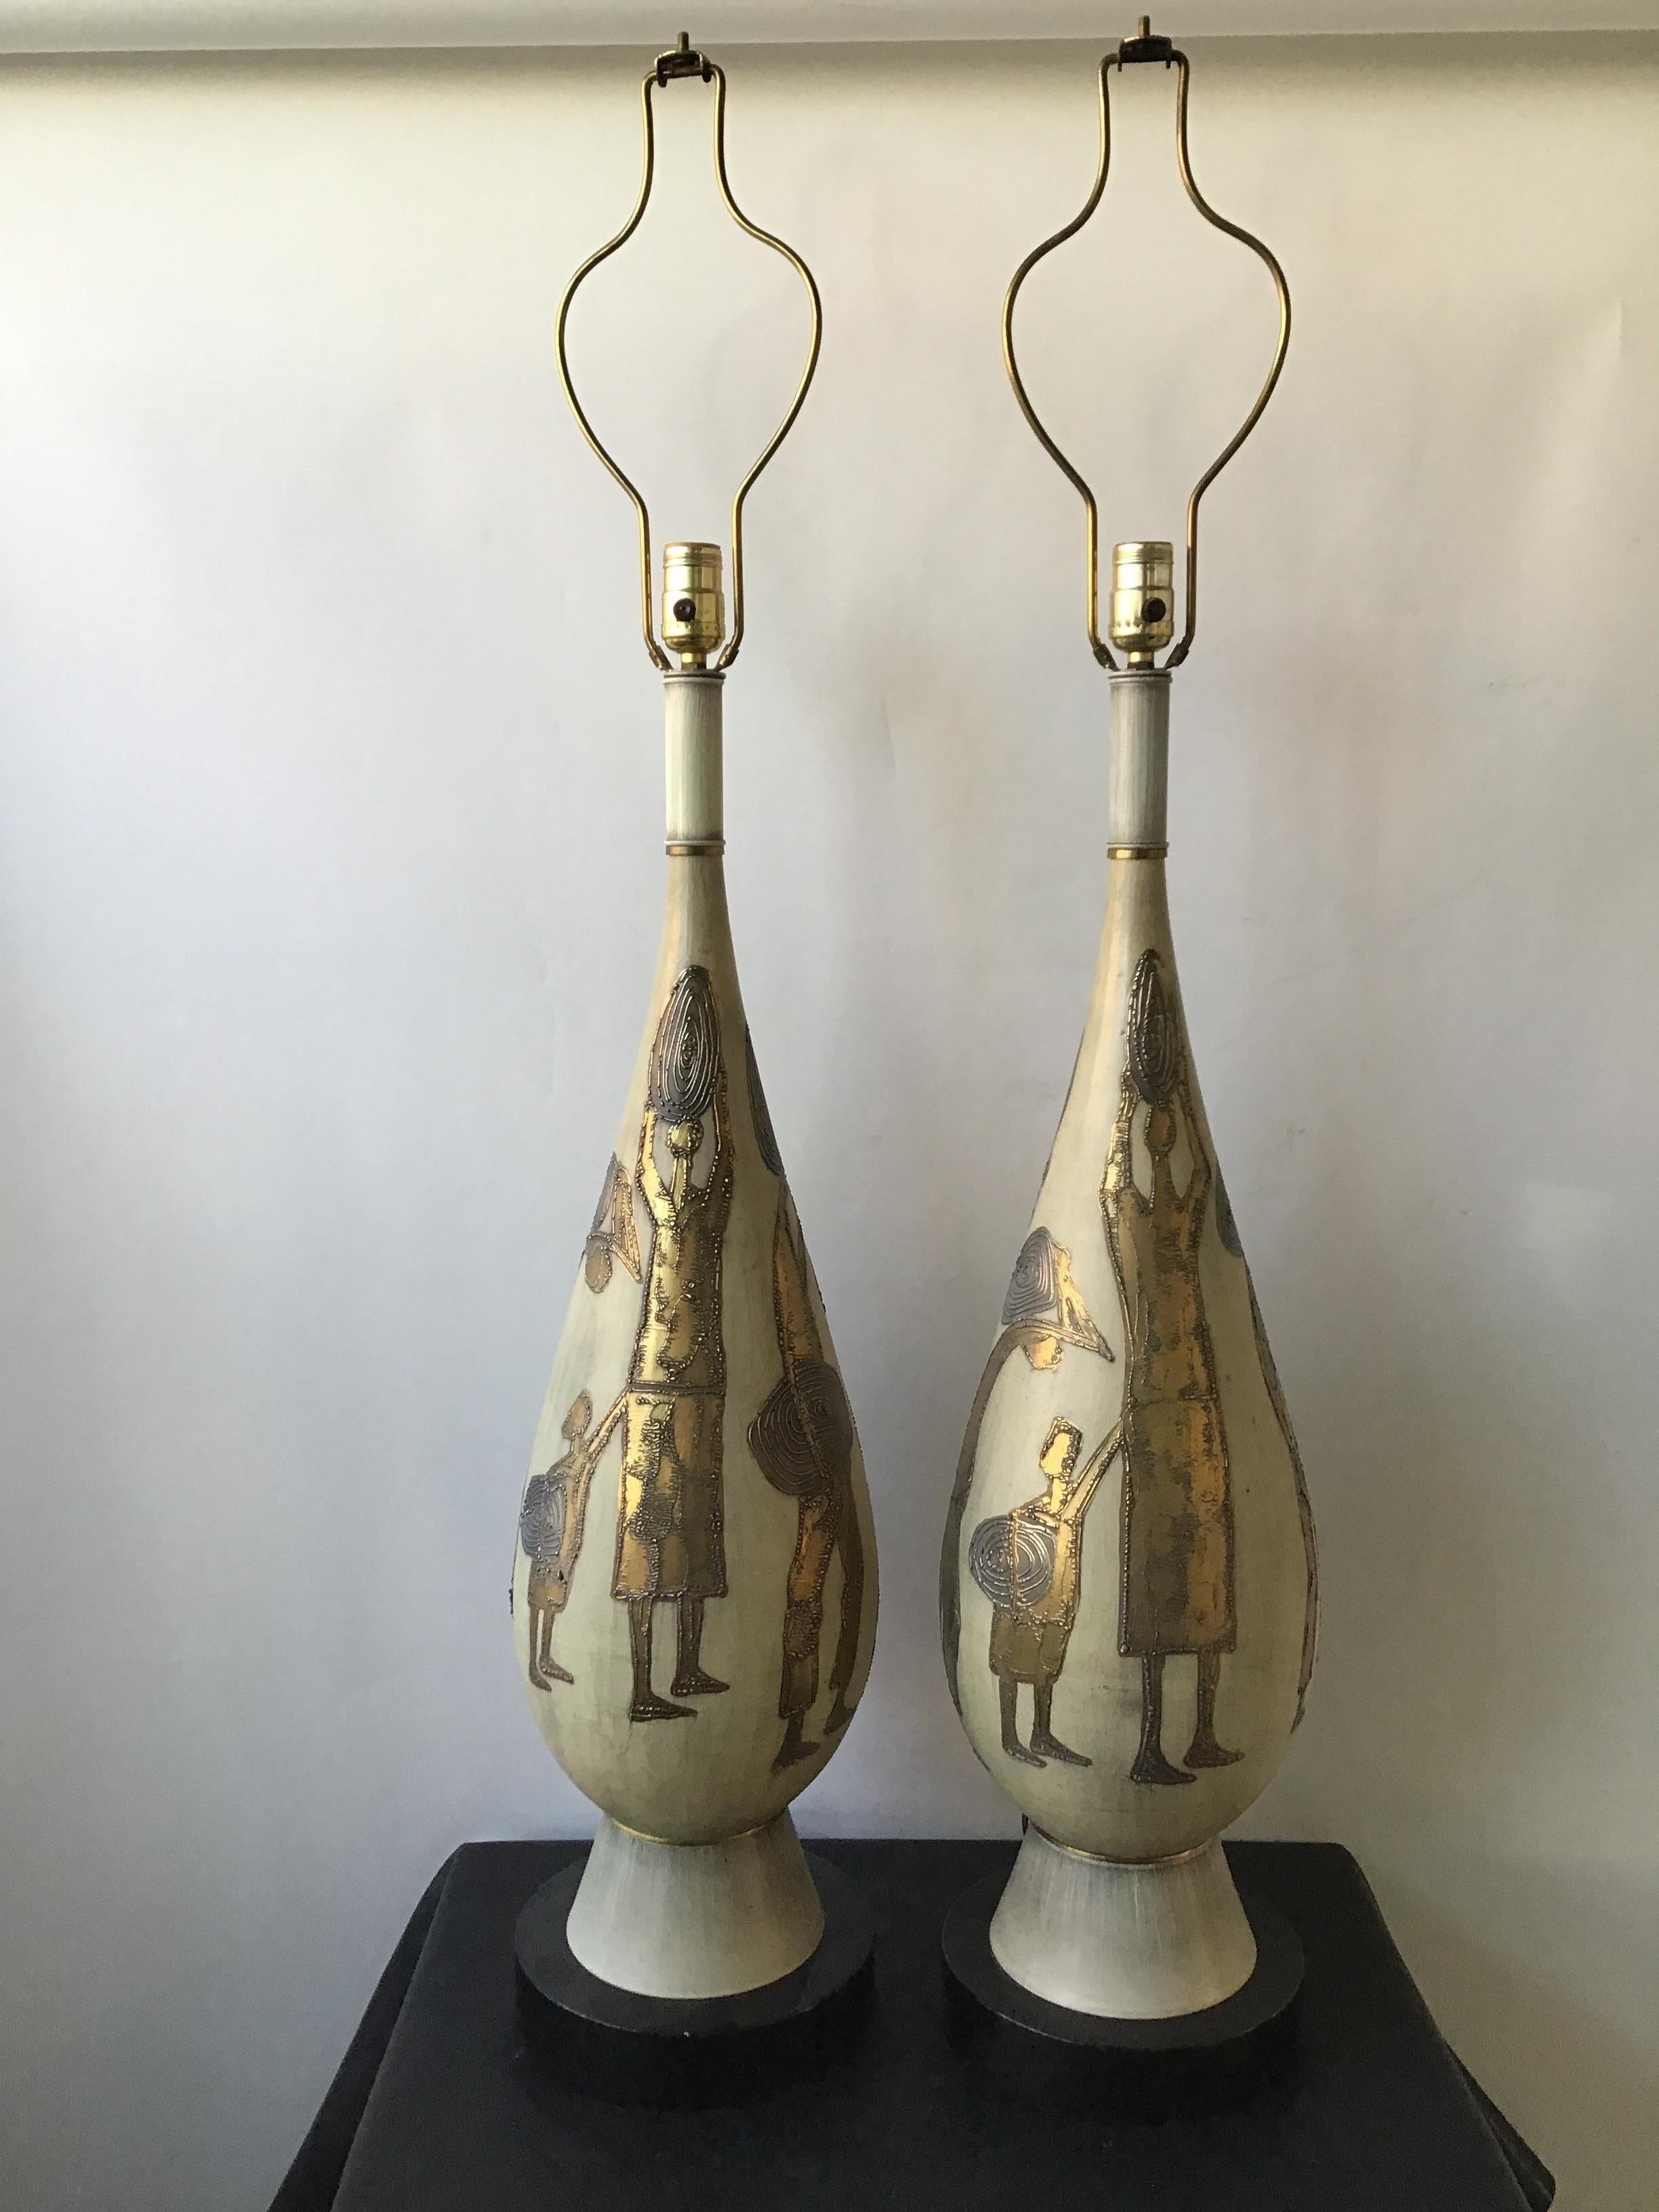 1950s large pair of ceramic lamps on wood bases. Scene of villagers.
Ceramic, hand painted using a gilt finish and raised paint.